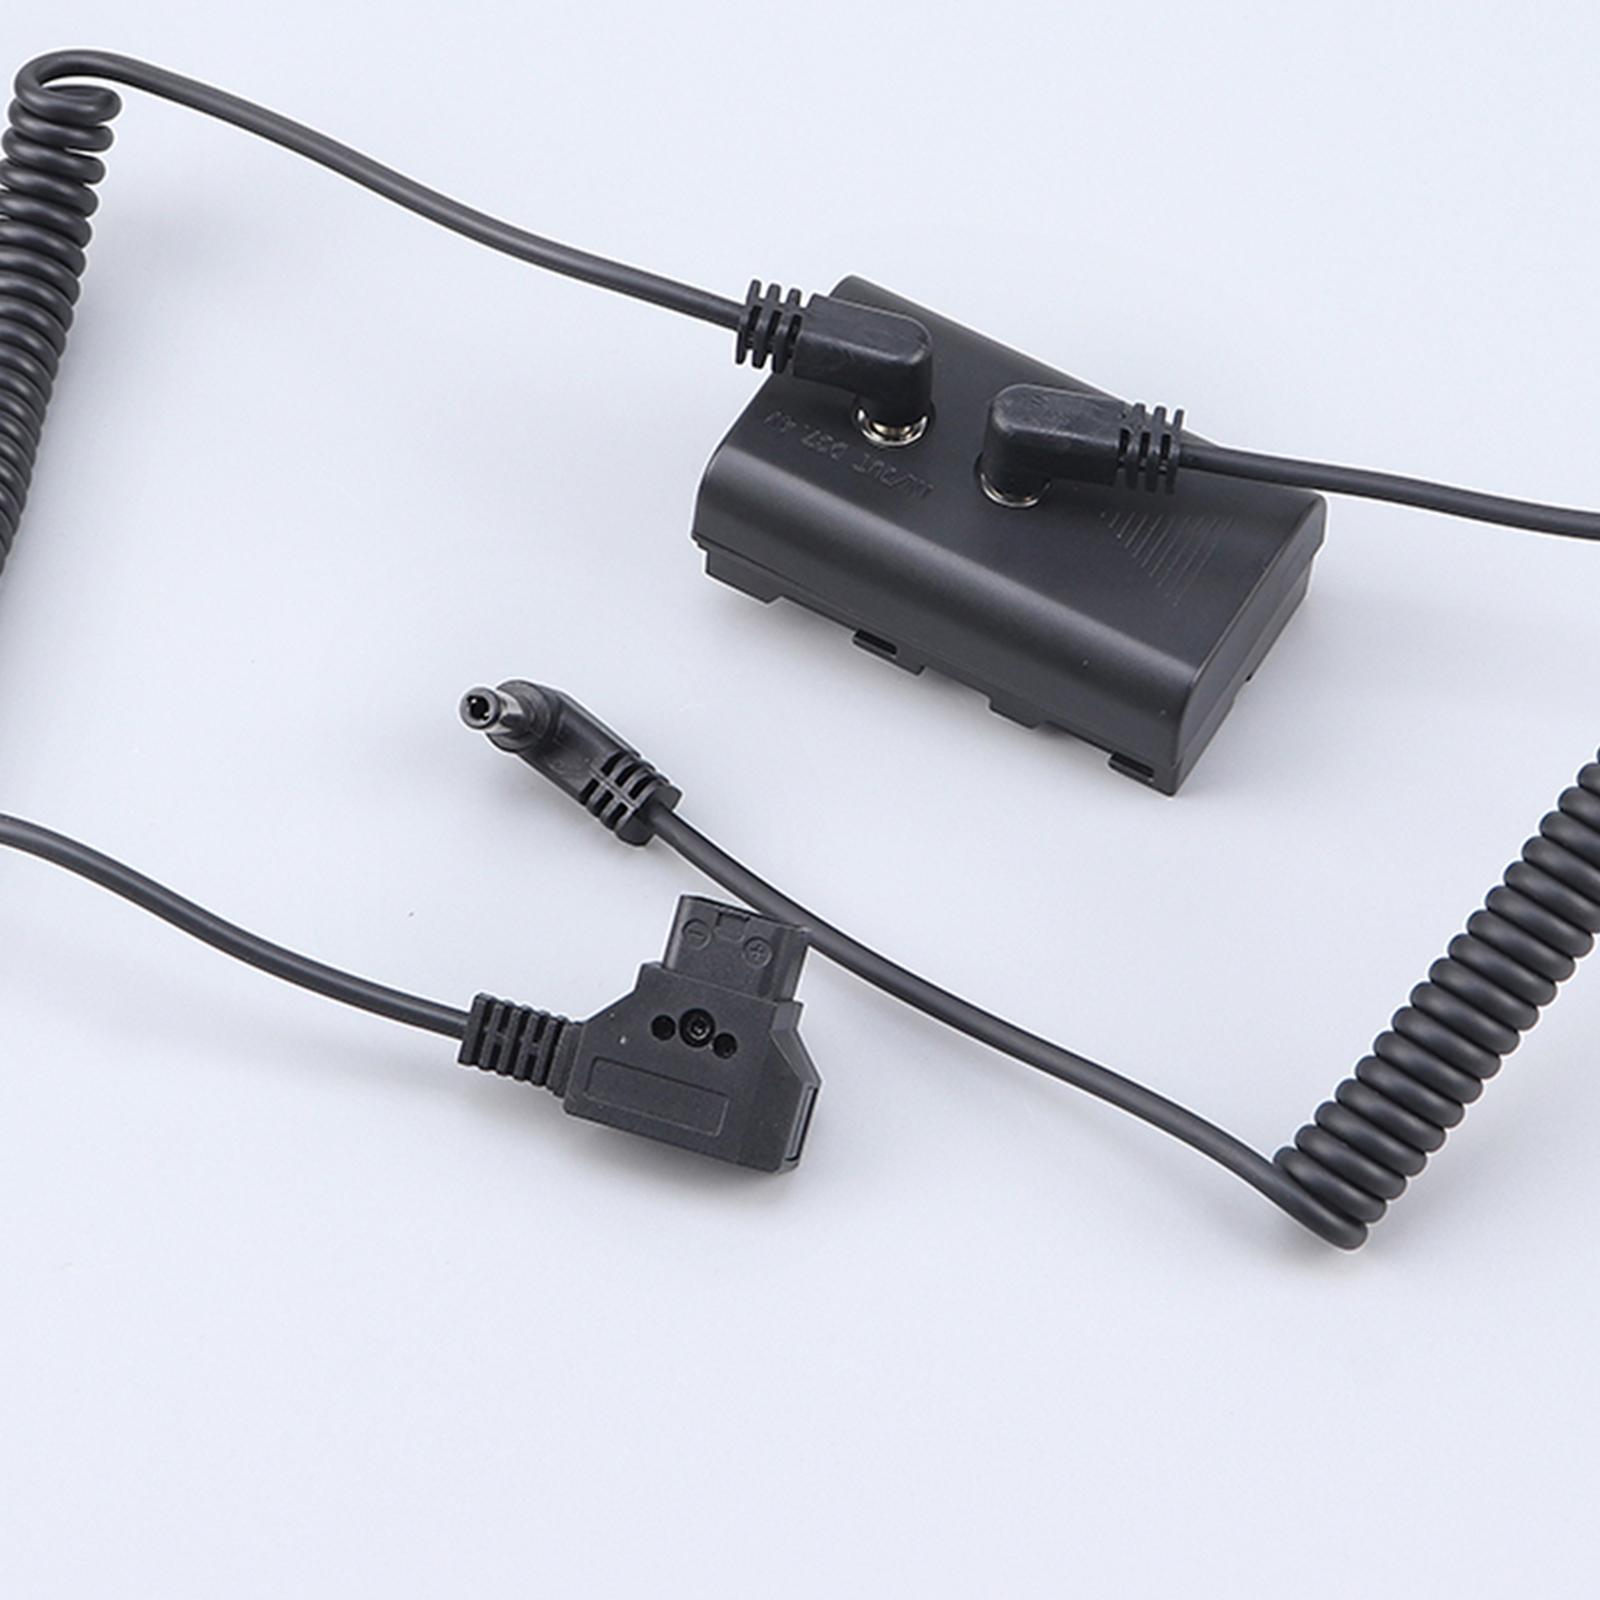 DC Coupler D - Tap to DC Cable Battery for Camera F550 / 570 / 750 / 770